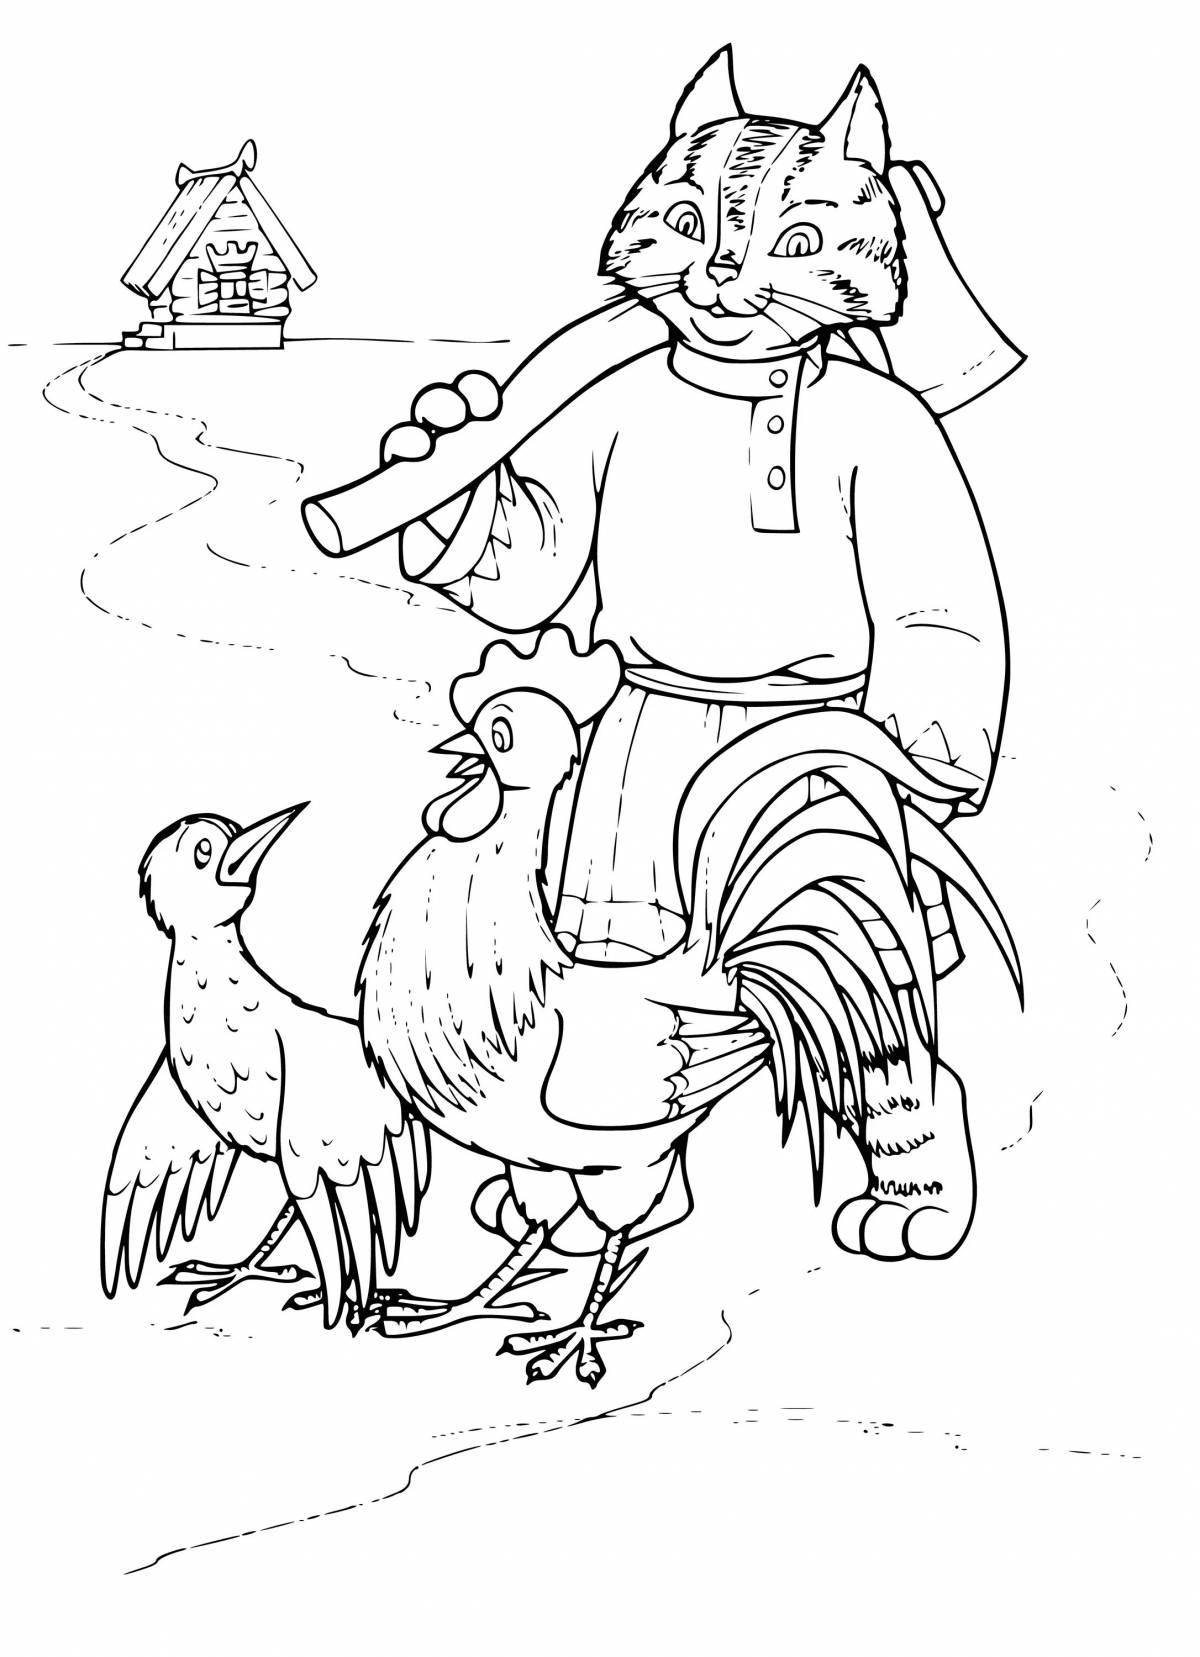 Exciting fox and rooster coloring book